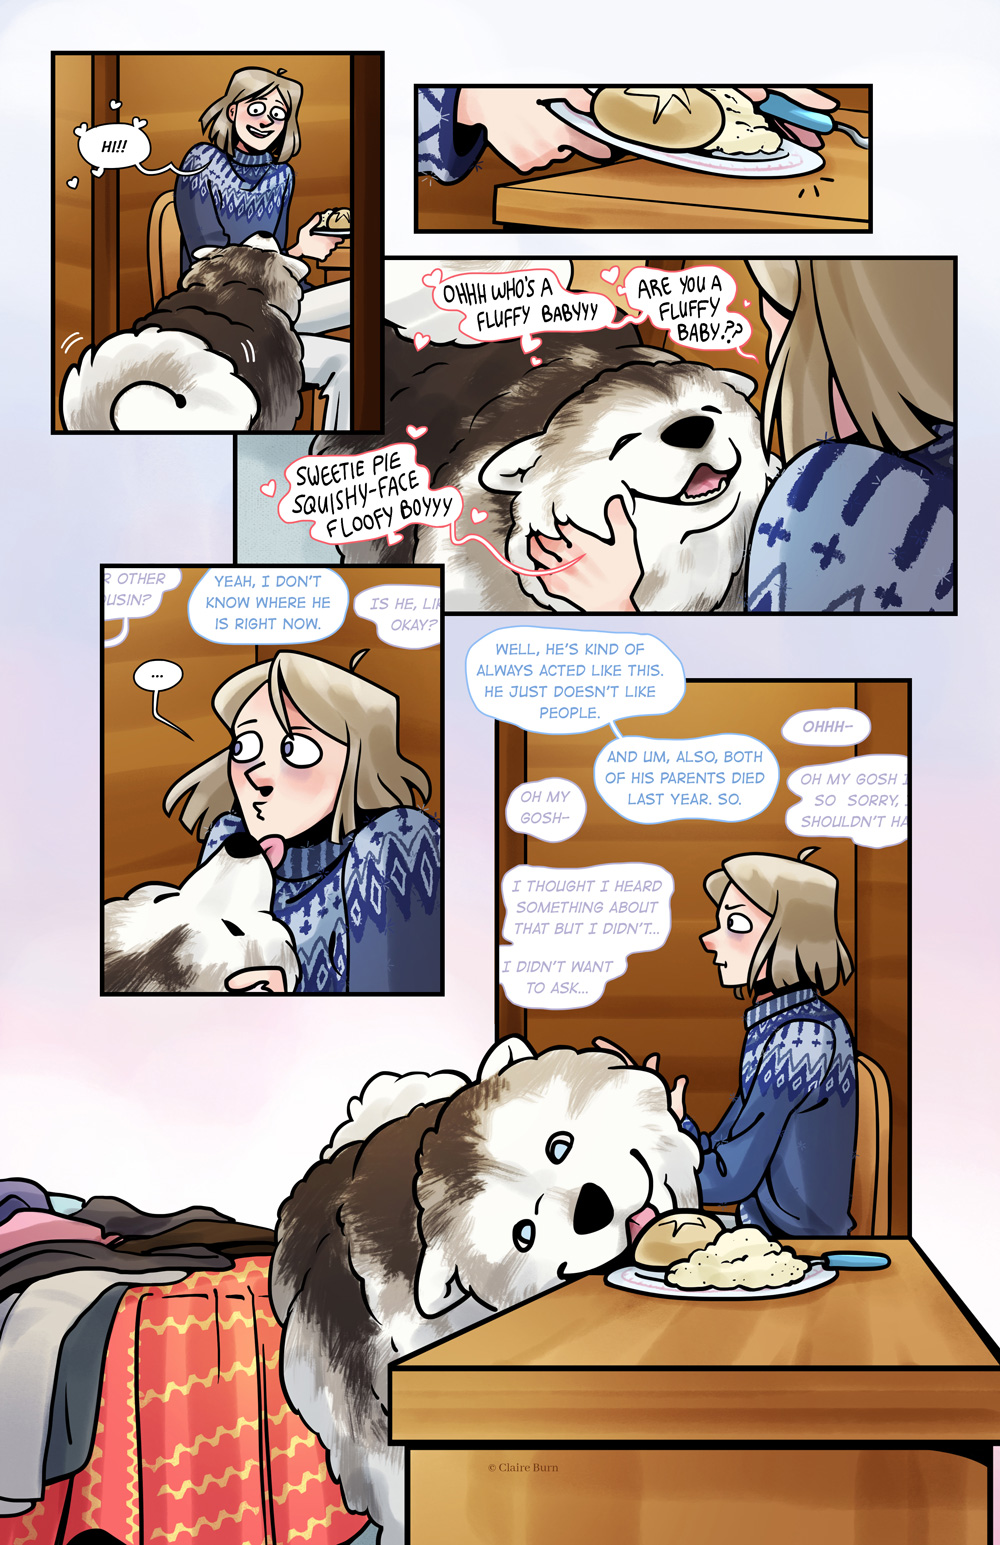 The main character meets a fluffy dog, but gets distracted hearing people talking about him in another room.